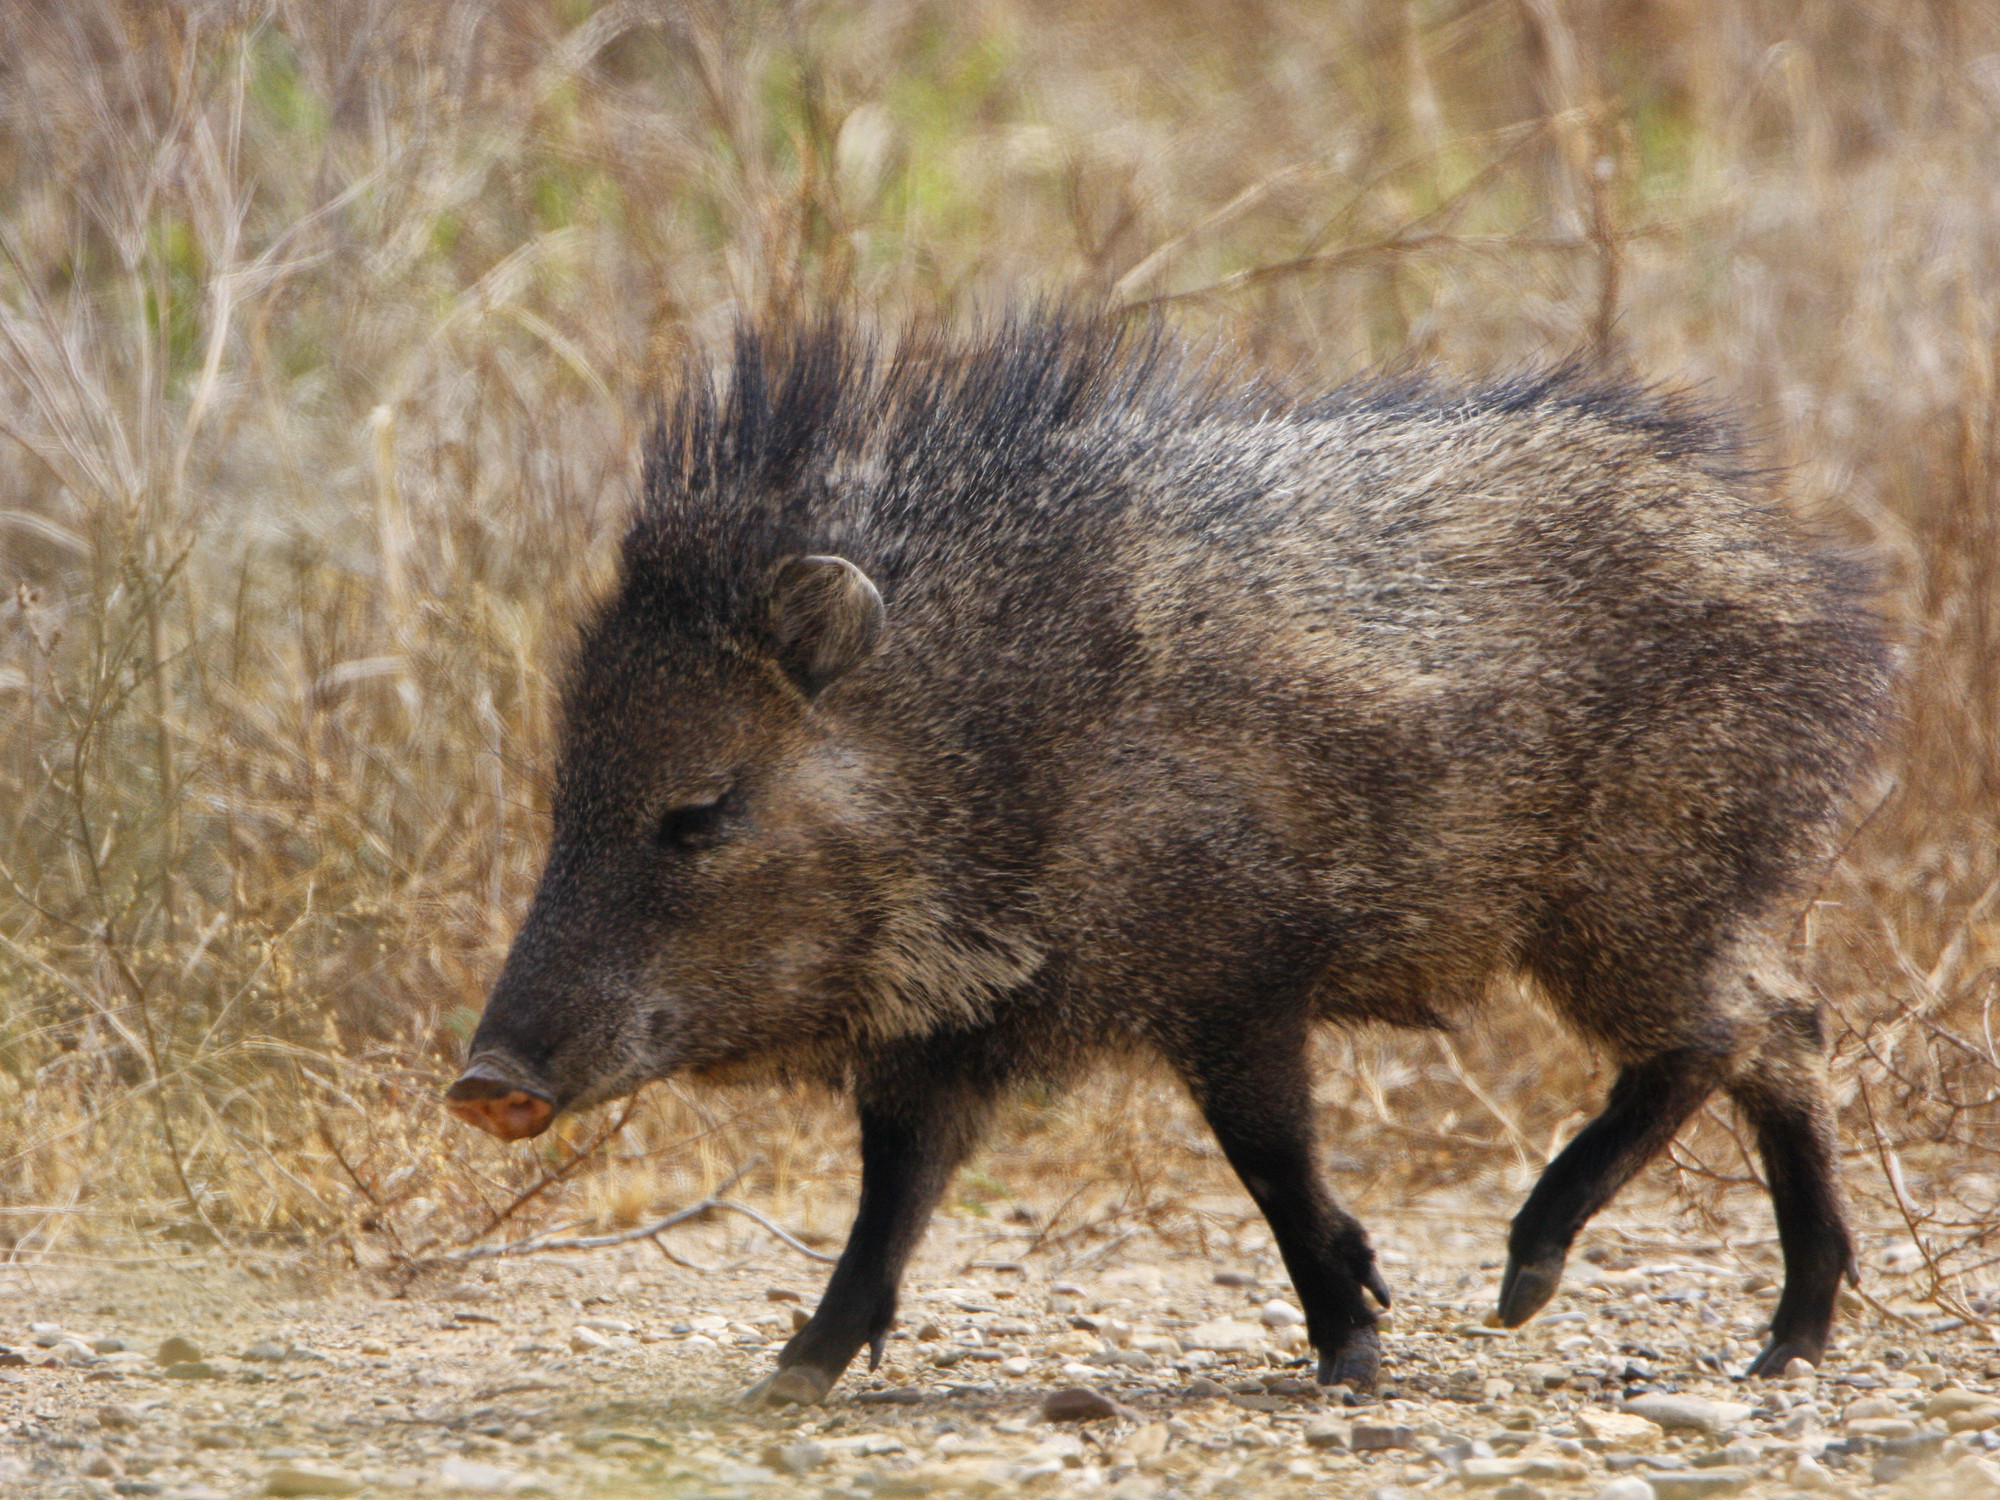 The Javelina isn’t a type of pig that I’m accustomed to seeing in Southwest...